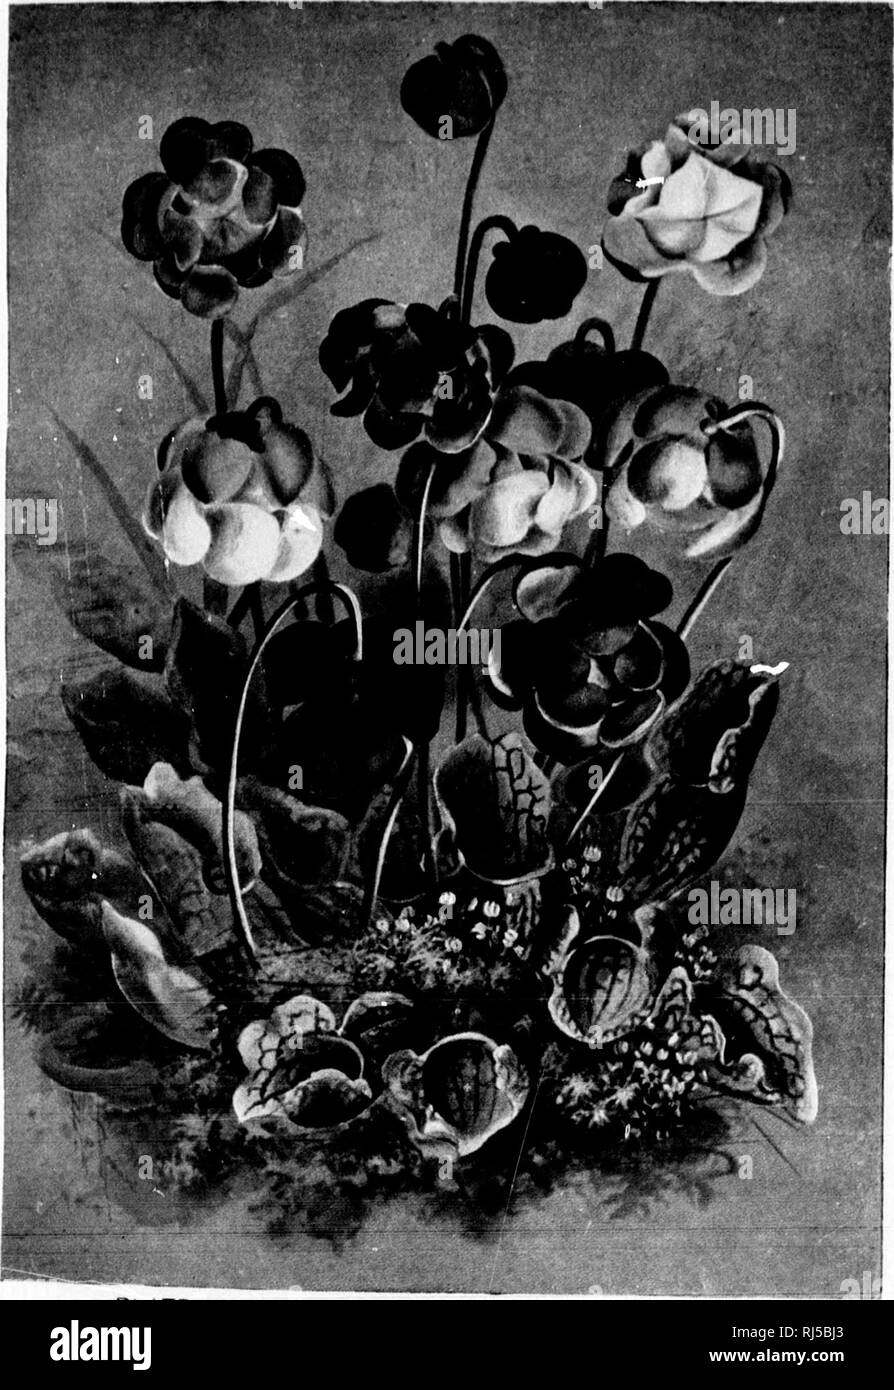 . A guide to the wild flowers [microform]. Wild flowers; Botany; Fleurs sauvages; Botanique. n its bearing .ler away, and our memory, to grow wild ad of tropical TIME OF BLOOM April, May. divided into six 3; with a three- !e of the scape; iipe: stout, with i for tiie state Liire of swamp ondering if it l1 economy of PPET-ROOT. TIME OF BLOOM May-July. 'h : of six oblong stvle. Leaves: vo to seven feet of the false ; as they are ; that we feel J a season of They also are on very lant's generic. PLATE XV. PITCHER.PLANT. Sarrarnii a purpurea COPYRIGHT, 1299, BY FREDERICK A. ftTOKES COMPANY. PRfNTt Stock Photo